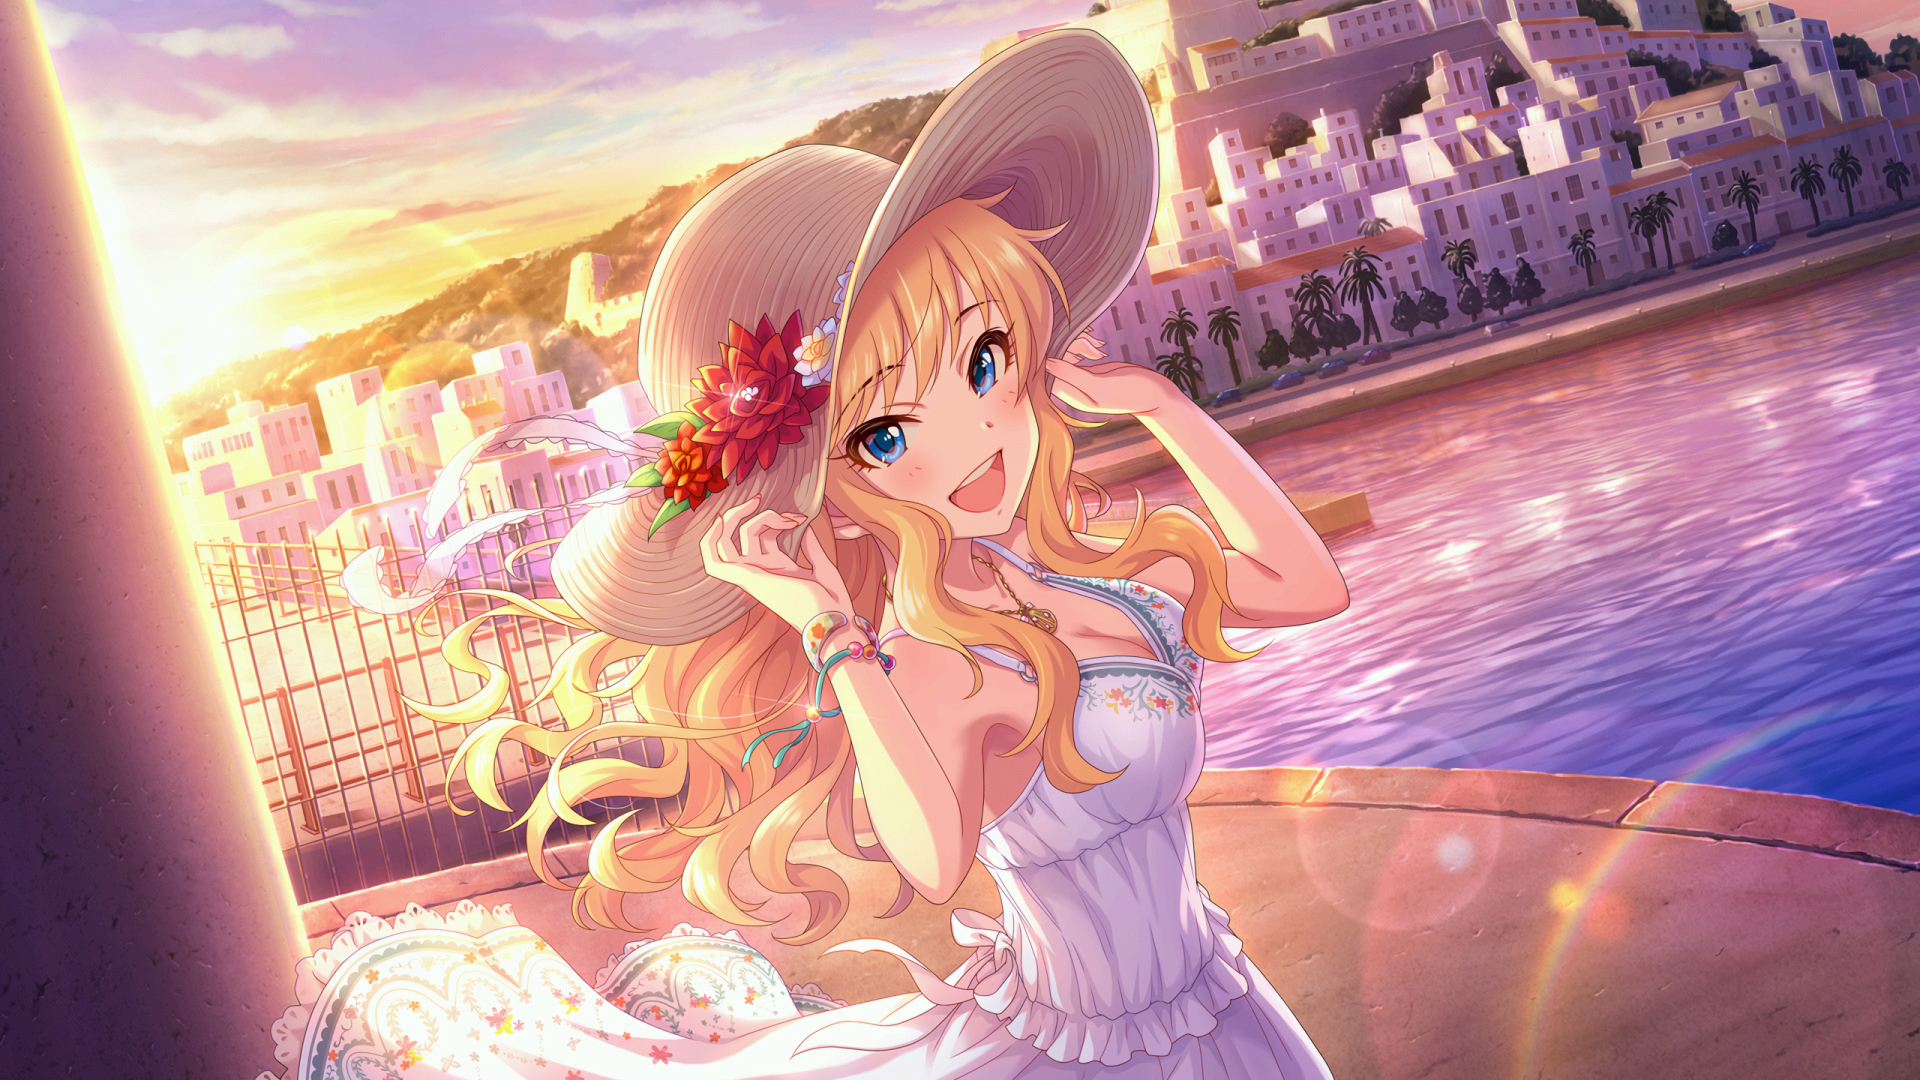 Beautiful anime girl in a hat by the river Desktop wallpapers 1920x1080